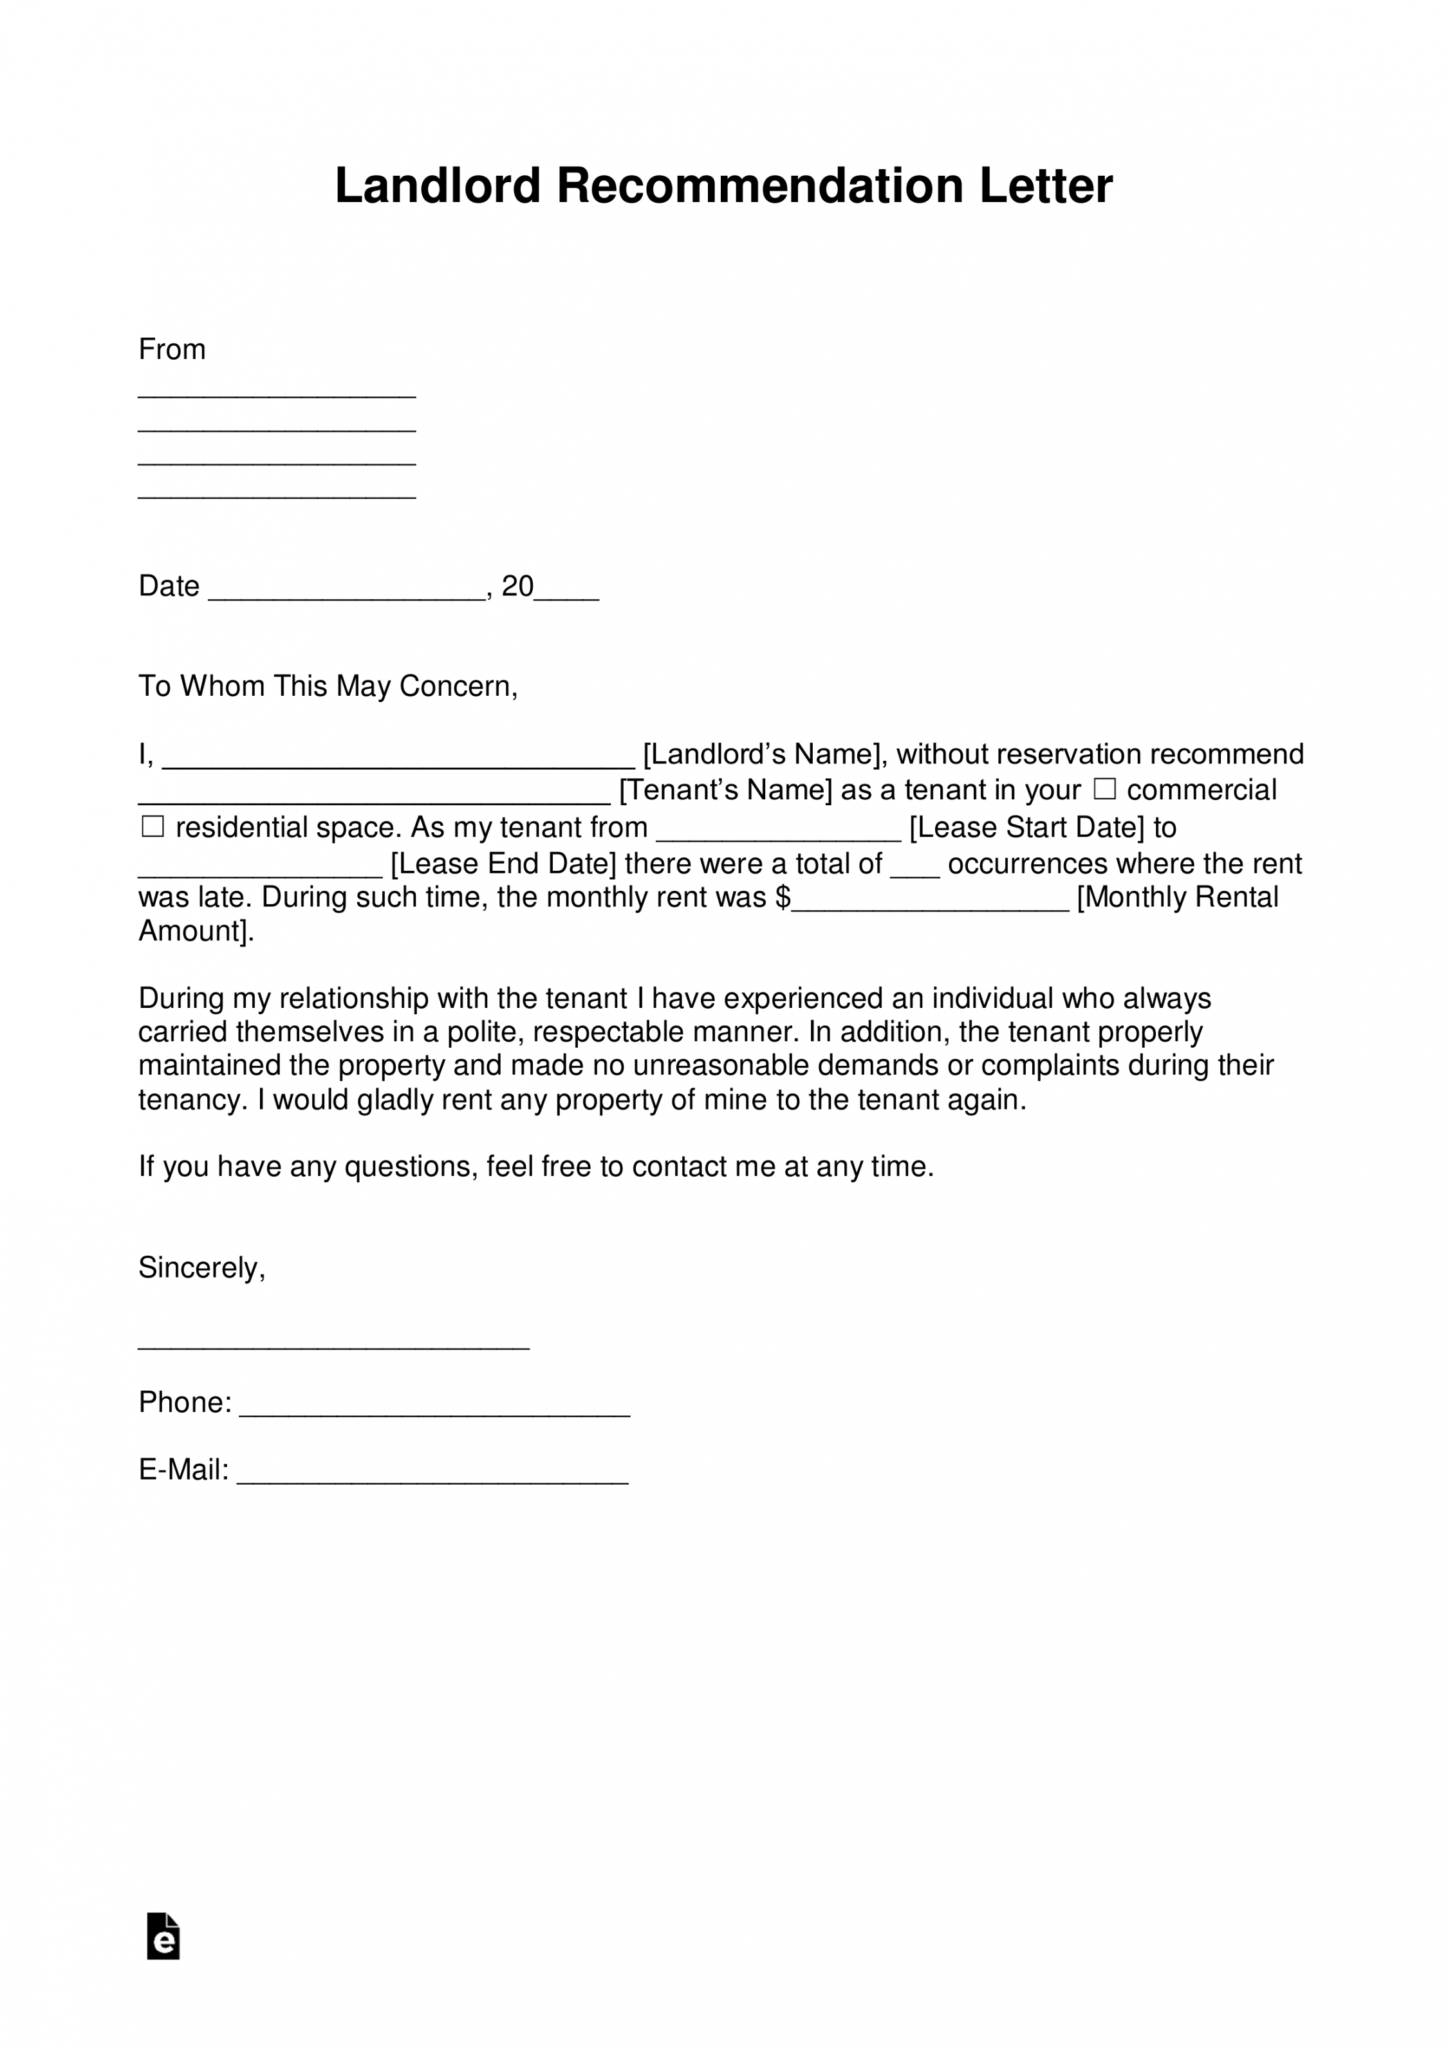 Printable Free Landlord Recommendation Letter For A Tenant With Rental